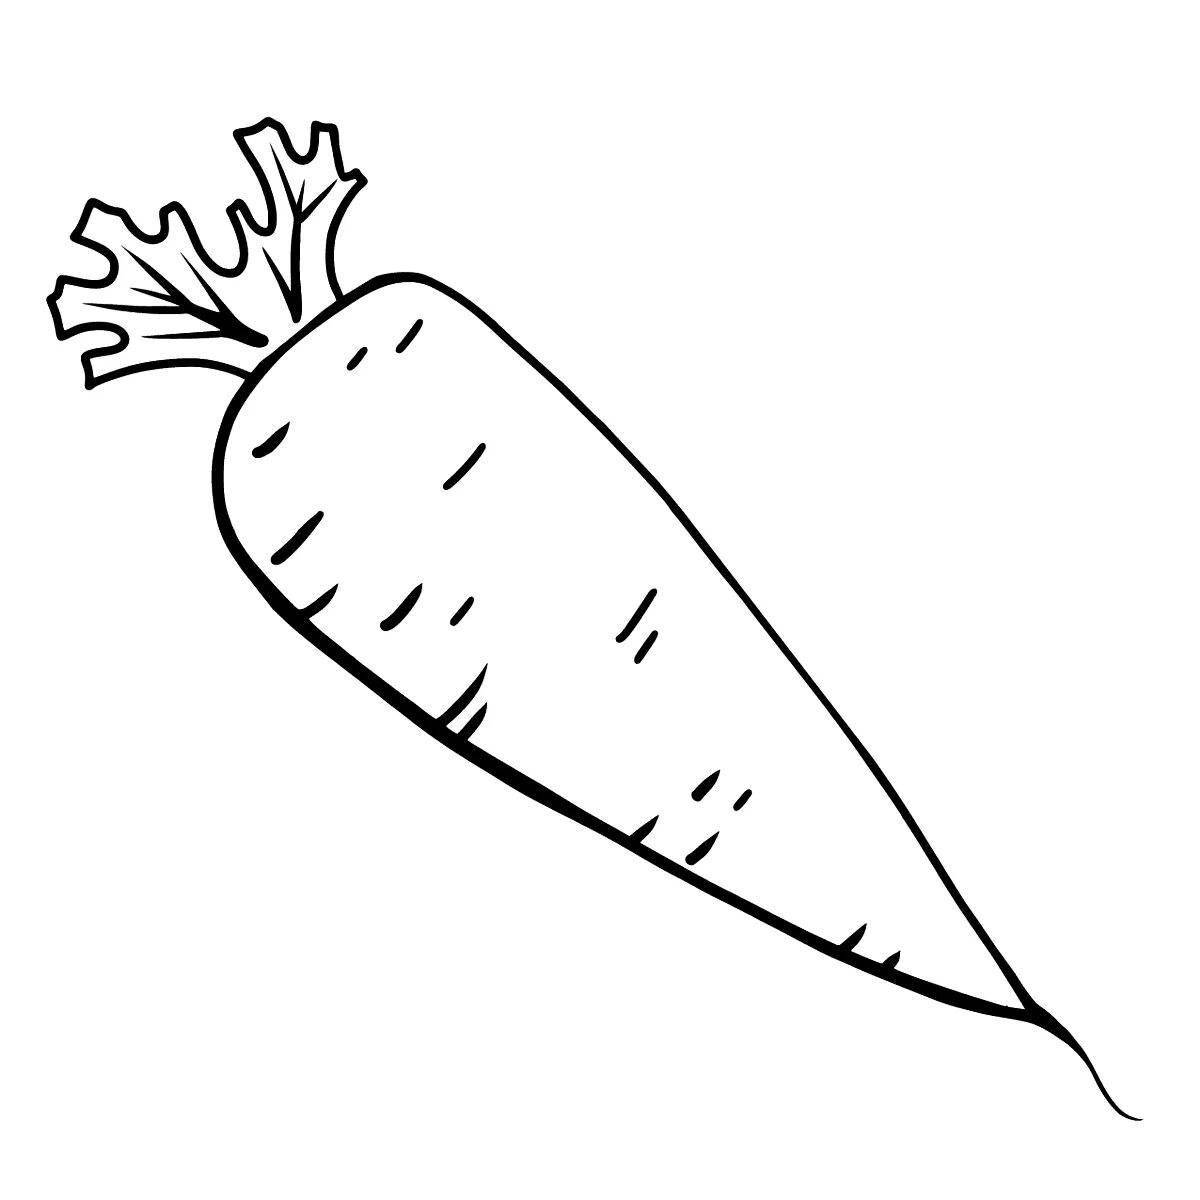 Glowing carrot coloring page